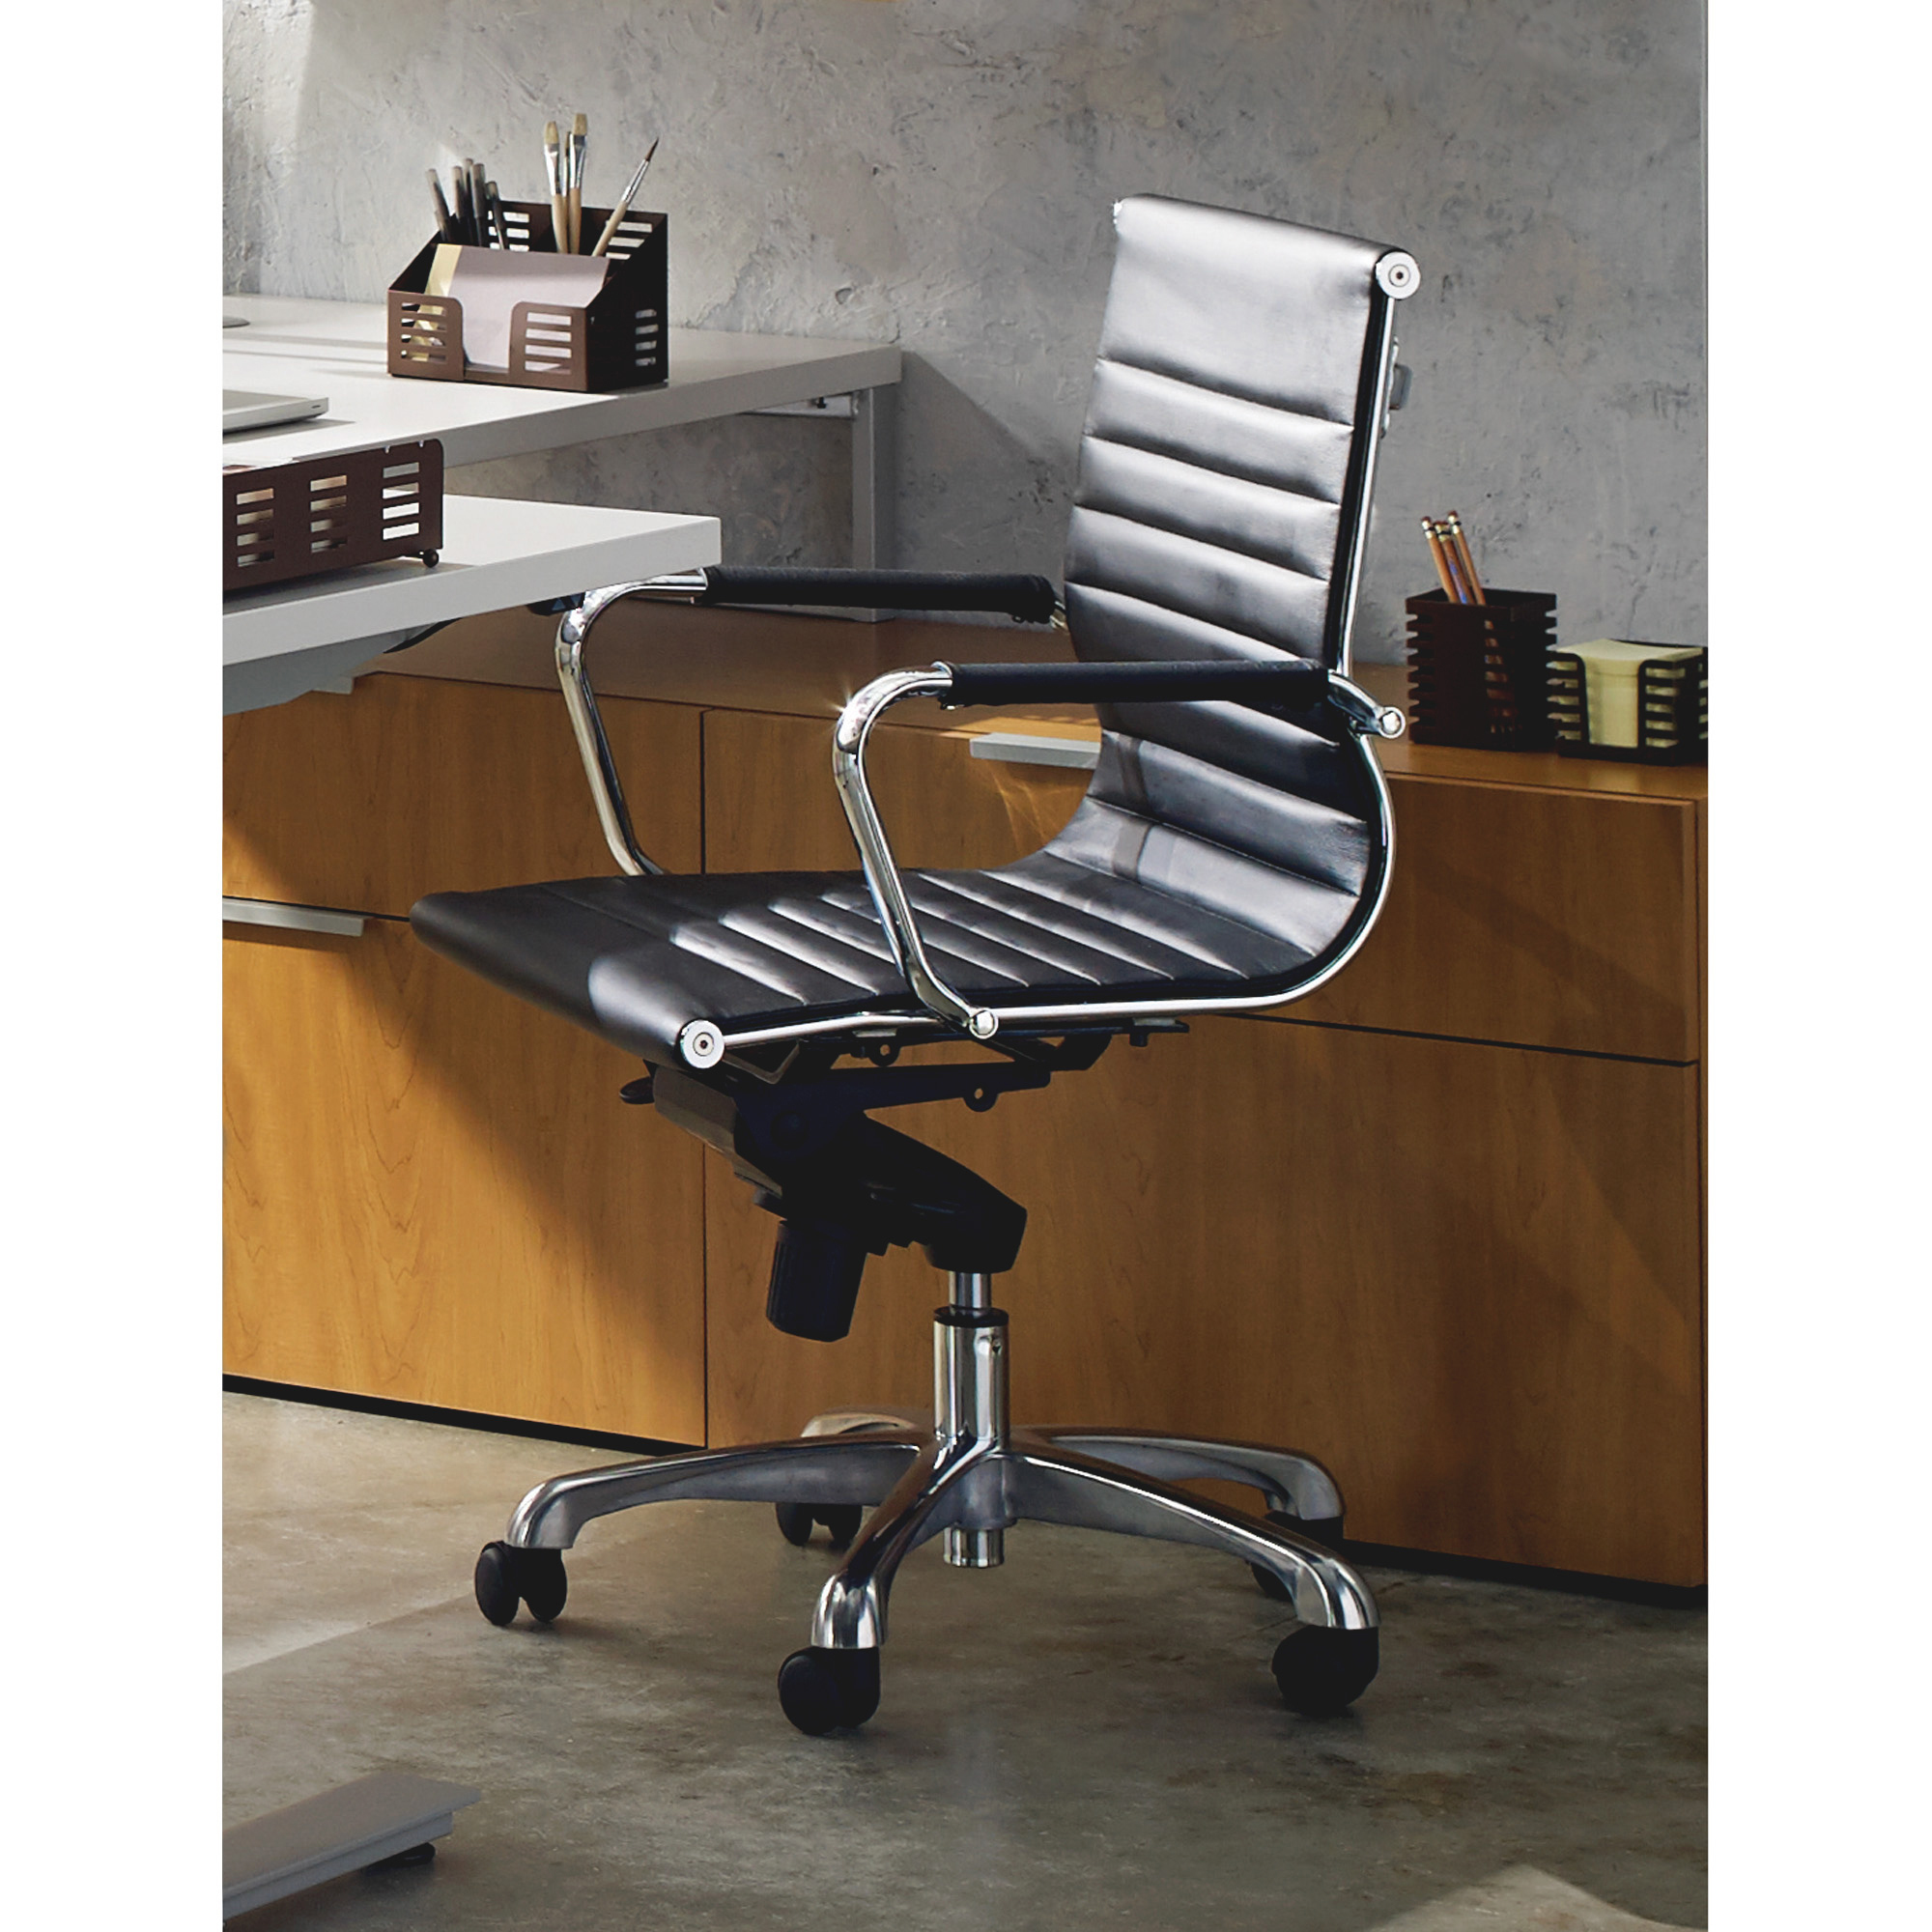 Lorell Modern Chair Series Mid-back Leather Chair Leather Seat - Leather Back - 5-star Base - Black - 20" Seat Width x 18.75" Seat Depth - 25" Width x 24.8" Depth x 39.8" Height - 1 Each - image 4 of 5